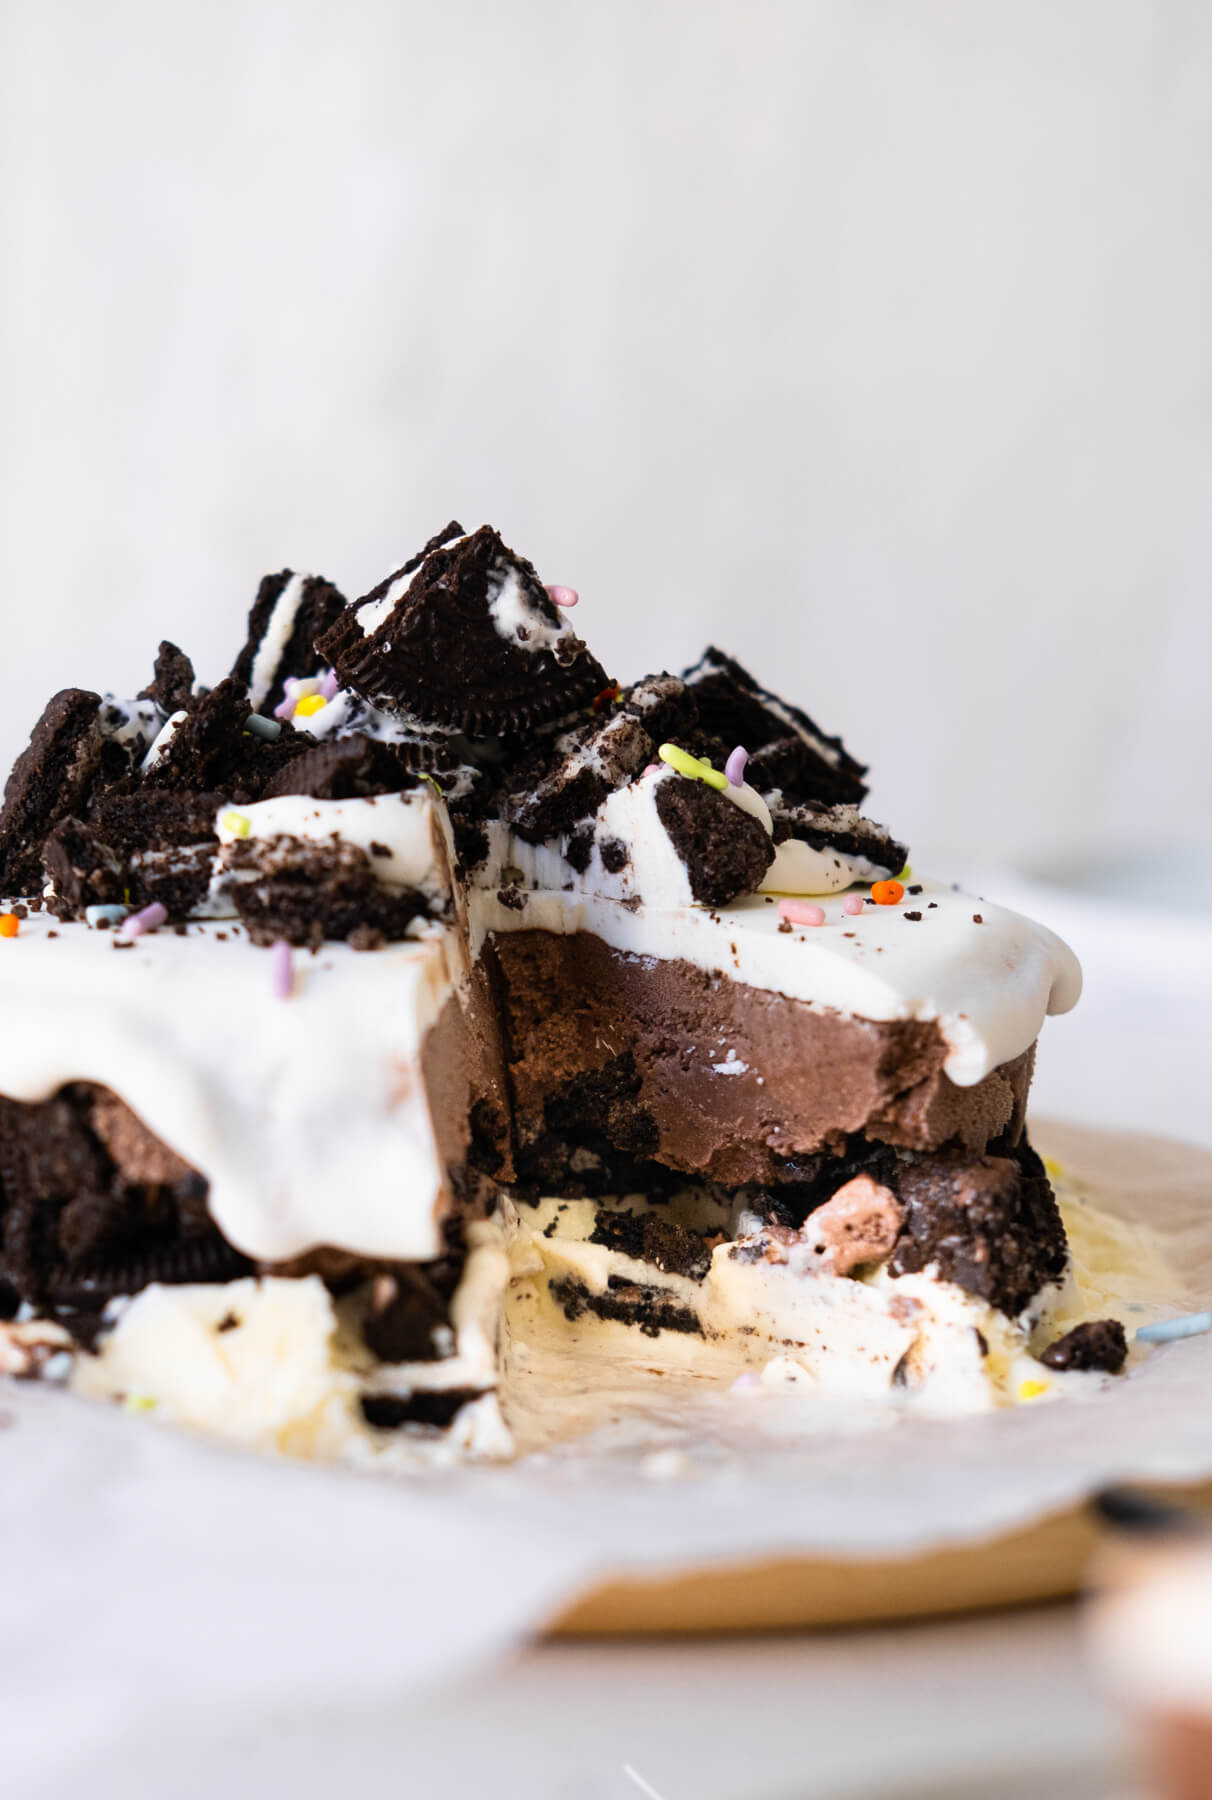 A cut section of cake with three layers: chocolate ice cream, Oreo crumbs and vanilla ice cream topped with Oreo chunks and rainbow sprinkles.  